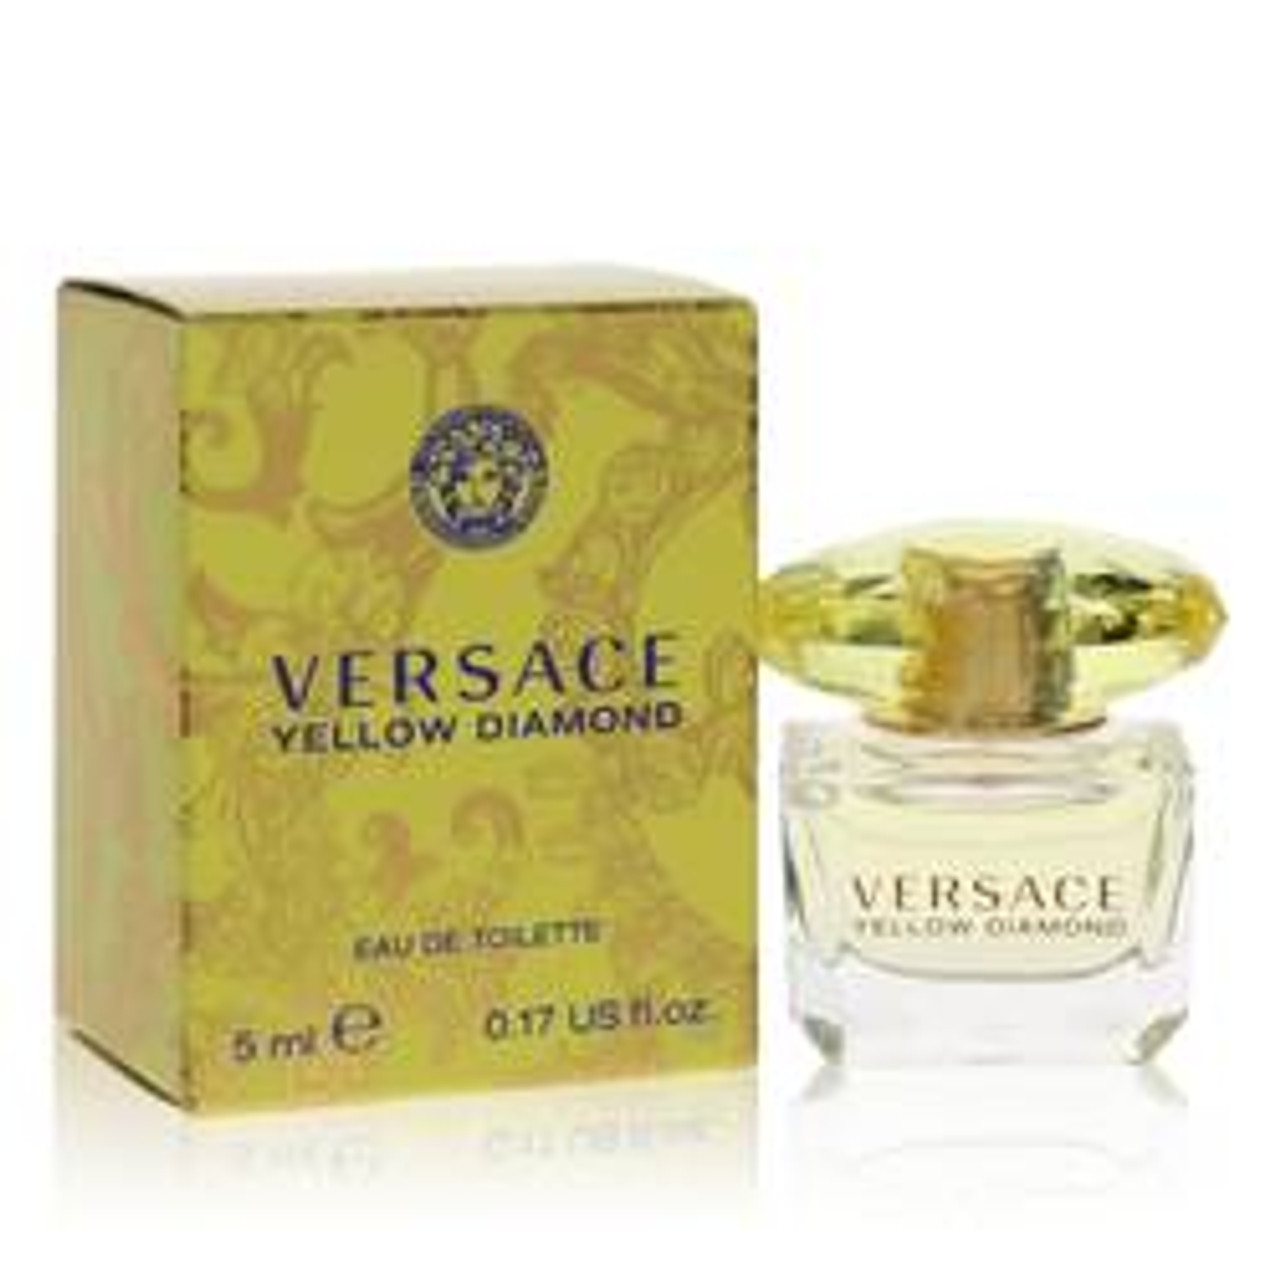 Versace Yellow Diamond Perfume By Versace Mini EDT 0.17 oz for Women - [From 31.00 - Choose pk Qty ] - *Ships from Miami